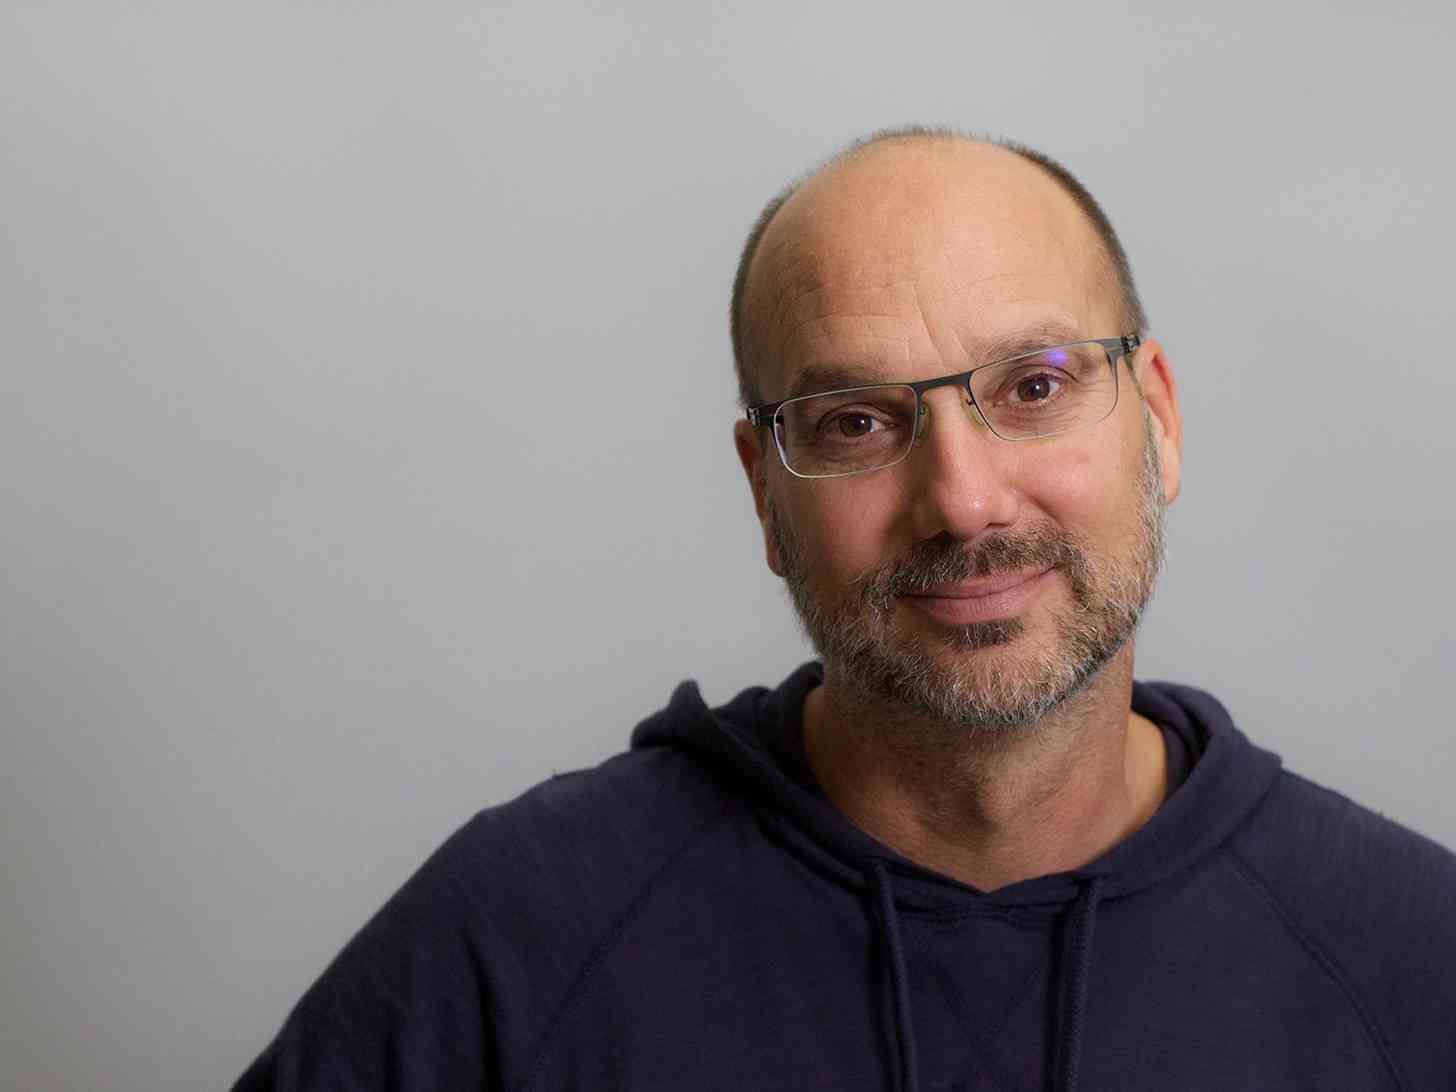 Andy Rubin official photo